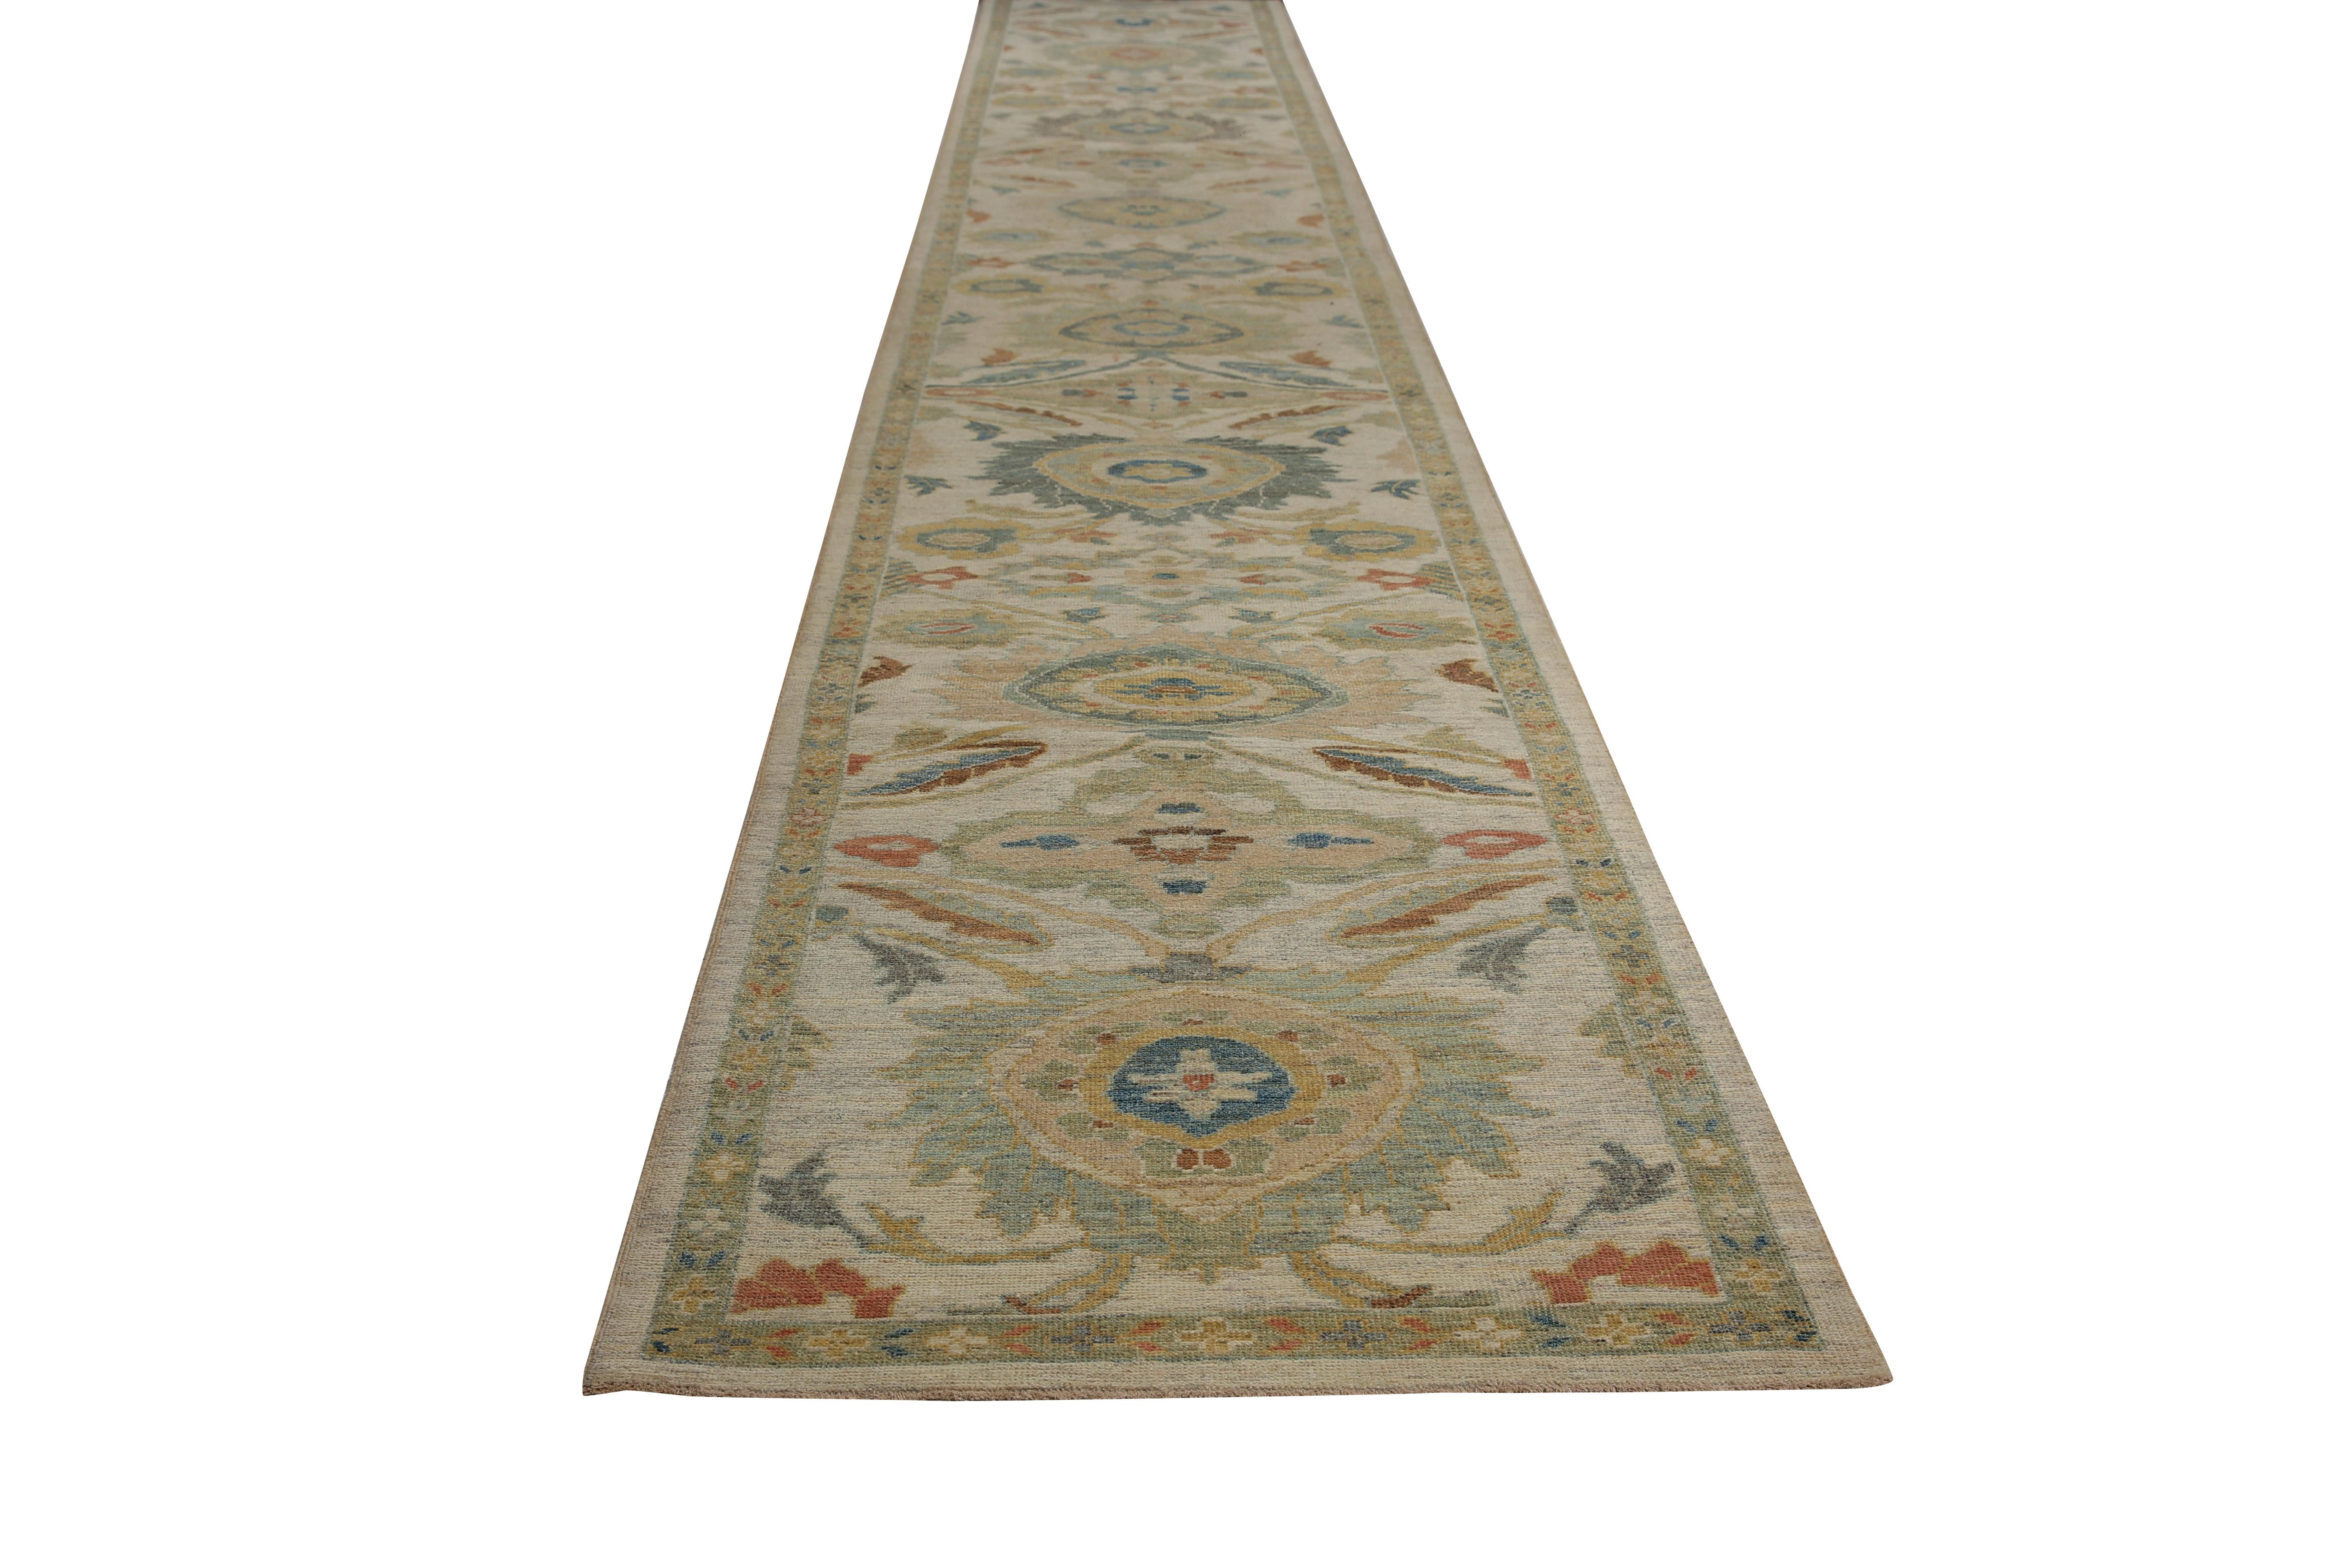 Luxurious Handmade Sultanabad Rug - Transitional Design, Blue, Orange, Green, Re For Sale 3